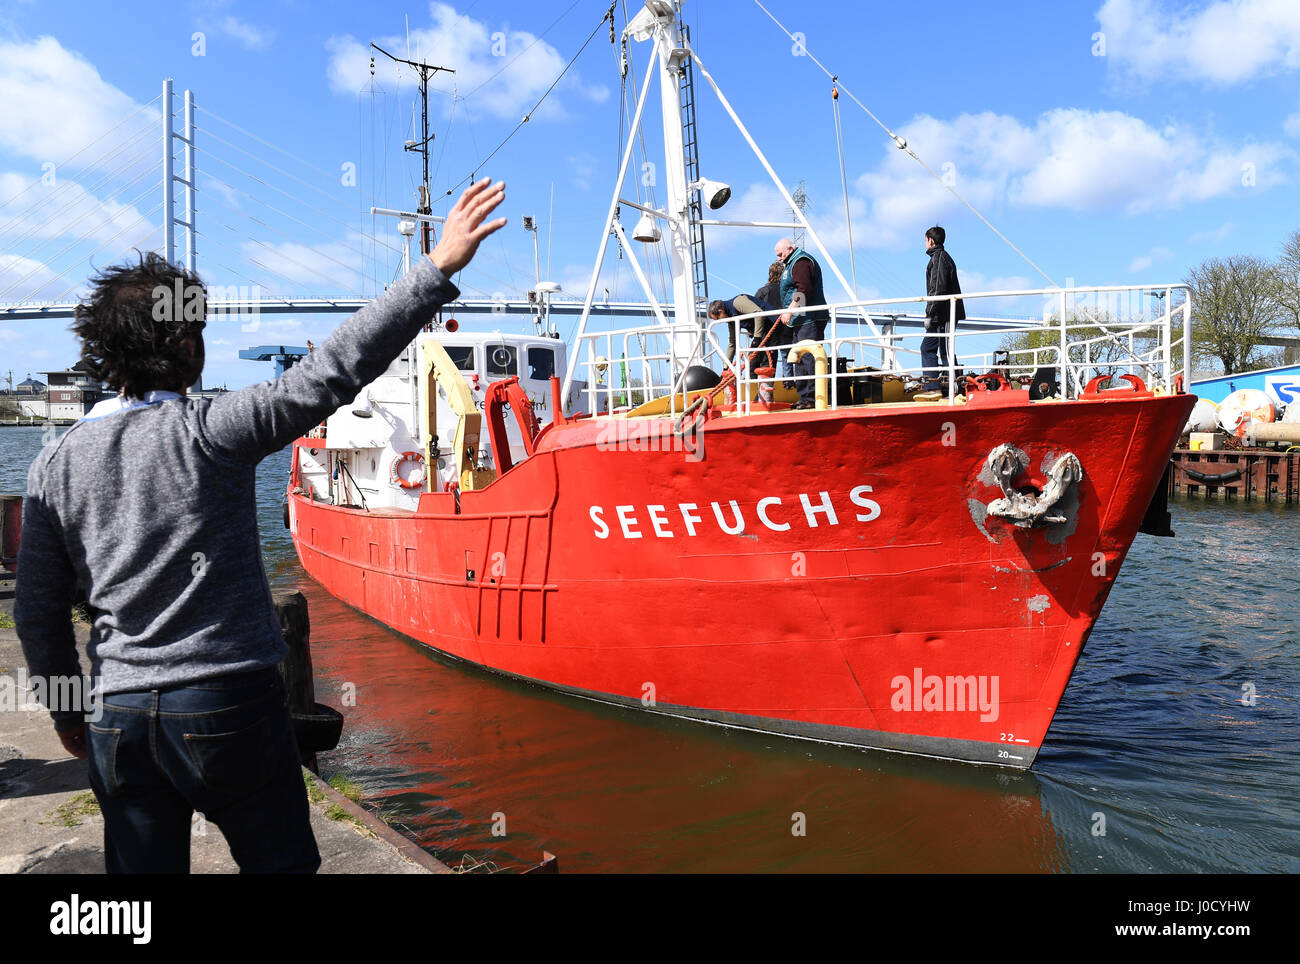 Stralsund, Germany. 11th Apr, 2017. The Seefuchs, a cutter belonging to a refugee initiative called Sea Eye, behind initiative founder Michael Buschheuer, in Stralsund, Germany, 11 April 2017. The vessel is equipped with 1500 life vests and life rafts for 500 people. It will assist shipwrecked refugees near the Libyan coast. Photo: Stefan Sauer/dpa-Zentralbild/dpa/Alamy Live News Stock Photo